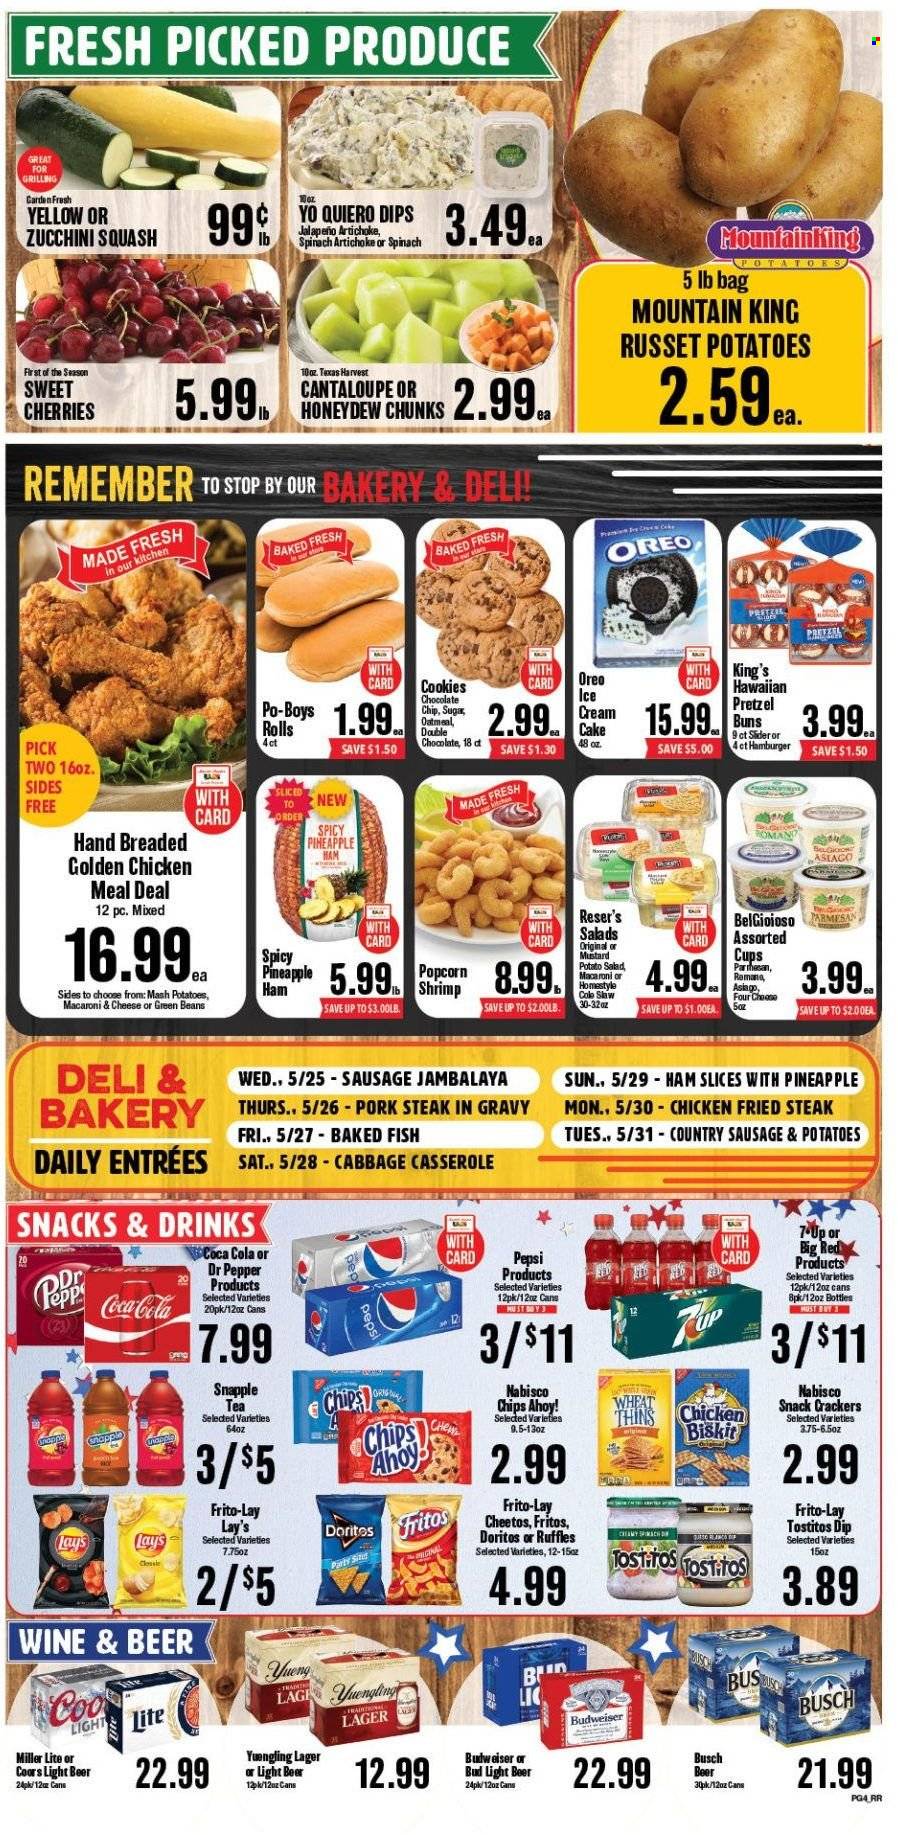 thumbnail - Market Basket Flyer - 05/25/2022 - 05/31/2022 - Sales products - pretzels, buns, artichoke, beans, cabbage, cantaloupe, green beans, russet potatoes, zucchini, potatoes, jalapeño, honeydew, pineapple, cherries, fish, shrimps, macaroni & cheese, hamburger, ham, sausage, potato salad, asiago, Oreo, dip, cookies, snack, crackers, Chips Ahoy!, Doritos, Fritos, Cheetos, chips, Lay’s, Thins, popcorn, Frito-Lay, Ruffles, Tostitos, oatmeal, mustard, Coca-Cola, Pepsi, Dr. Pepper, 7UP, Snapple, tea, beer, Busch, Bud Light, Lager, steak, pork chops, pork meat, Budweiser, Miller Lite, Coors, Yuengling. Page 4.